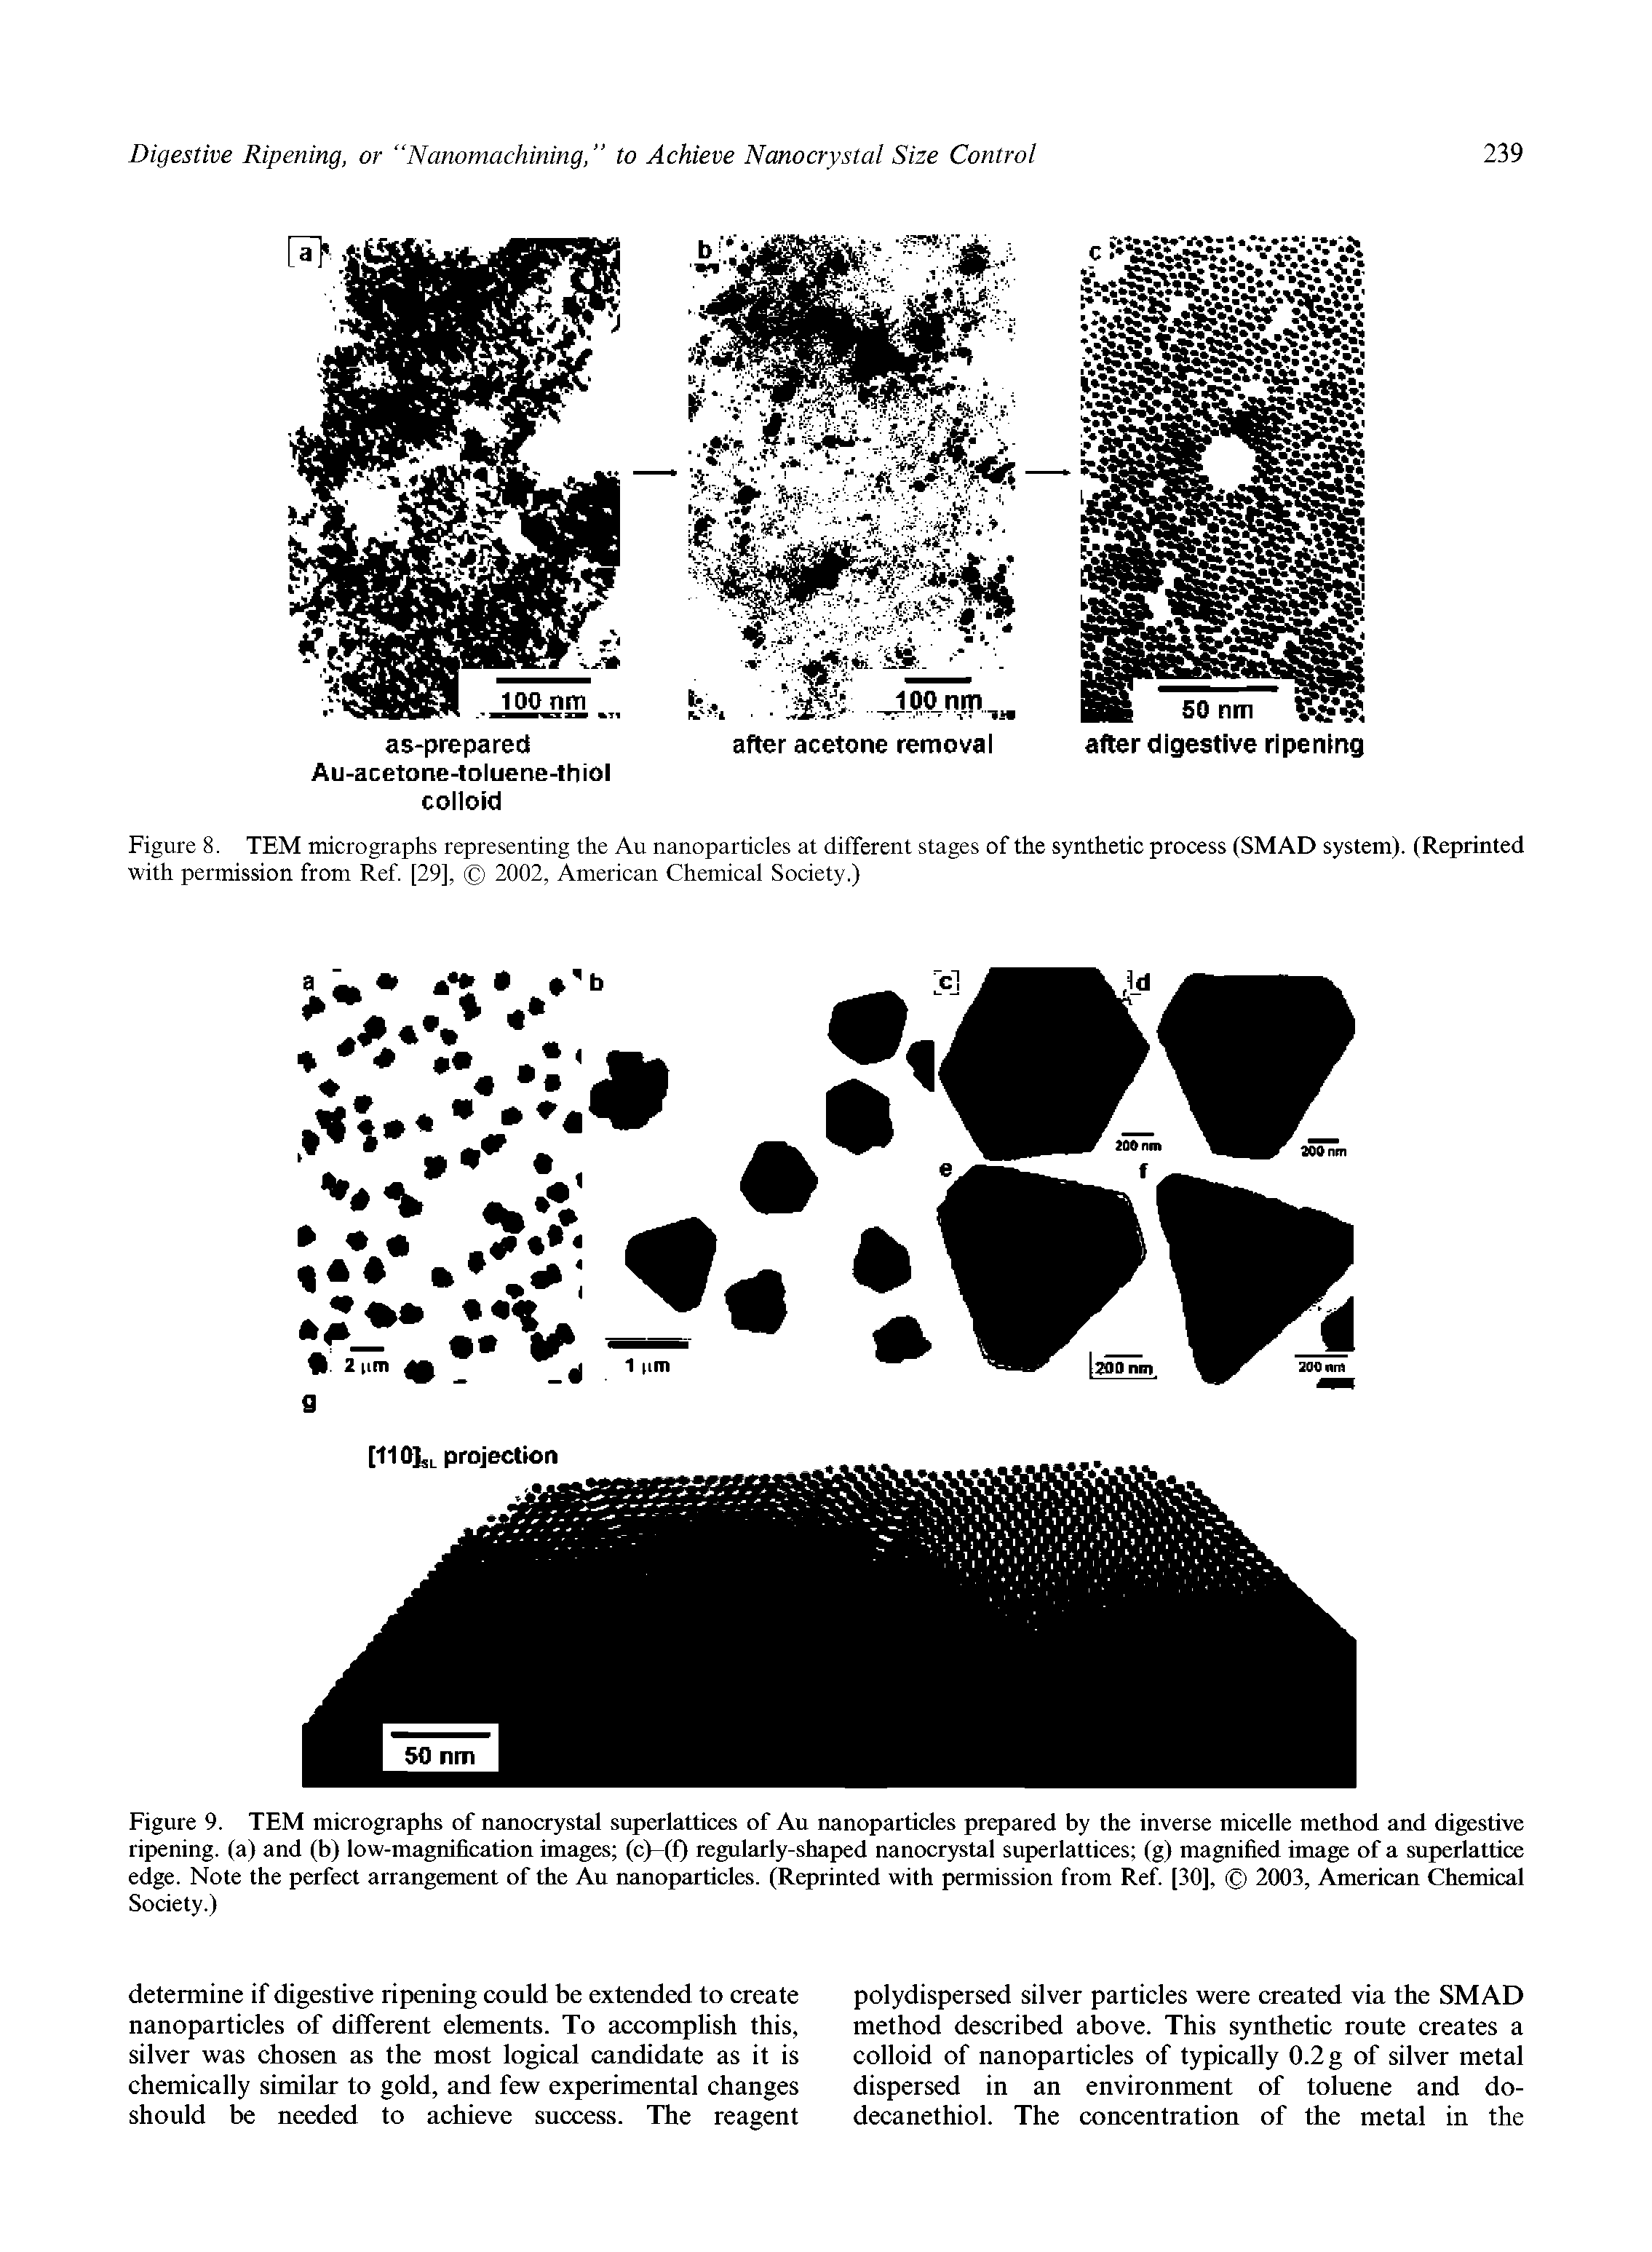 Figure 9. TEM micrographs of nanocrystal superlattices of Au nanoparticles prepared by the inverse micelle method and digestive ripening, (a) and (b) low-magnification images (c (f) regularly-shaped nanocrystal superlattices (g) magnified image of a superlattice edge. Note the perfect arrangement of the Au nanoparticles. (Reprinted with permission from Ref. [30], 2003, American Chemical Society.)...